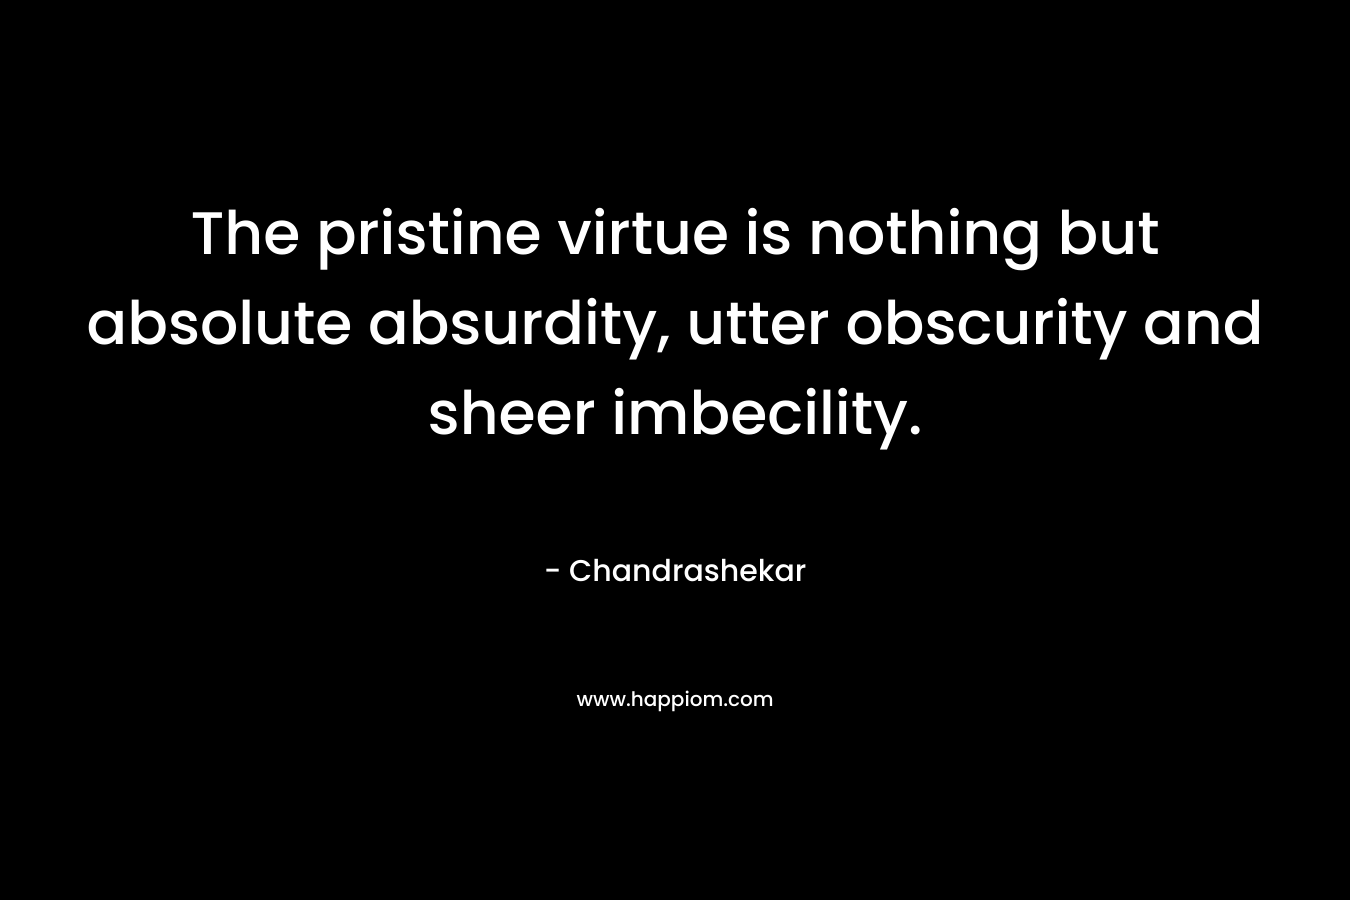 The pristine virtue is nothing but absolute absurdity, utter obscurity and sheer imbecility. – Chandrashekar